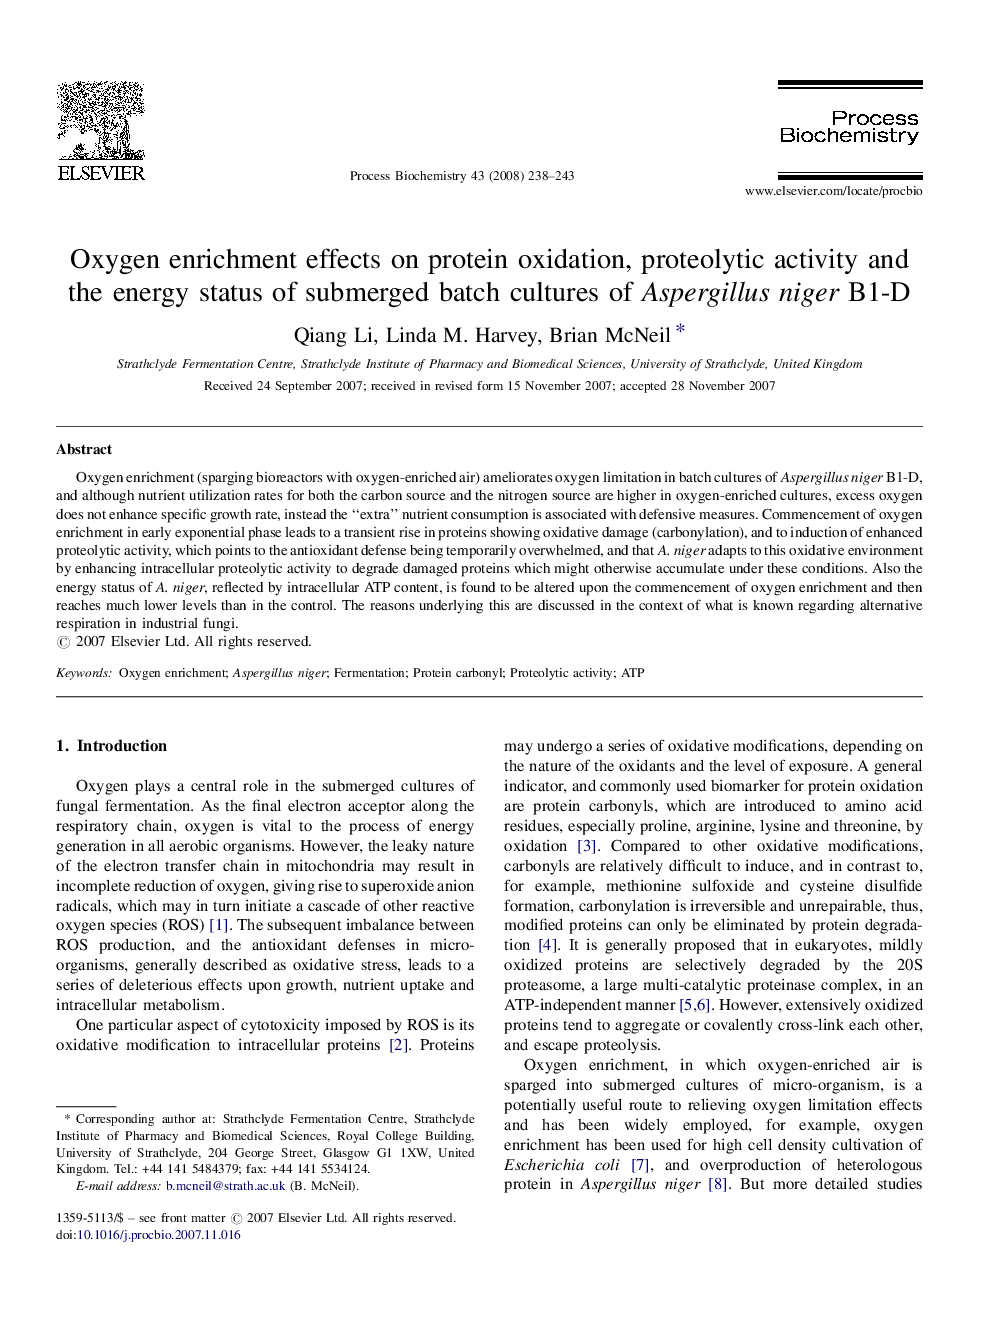 Oxygen enrichment effects on protein oxidation, proteolytic activity and the energy status of submerged batch cultures of Aspergillus niger B1-D